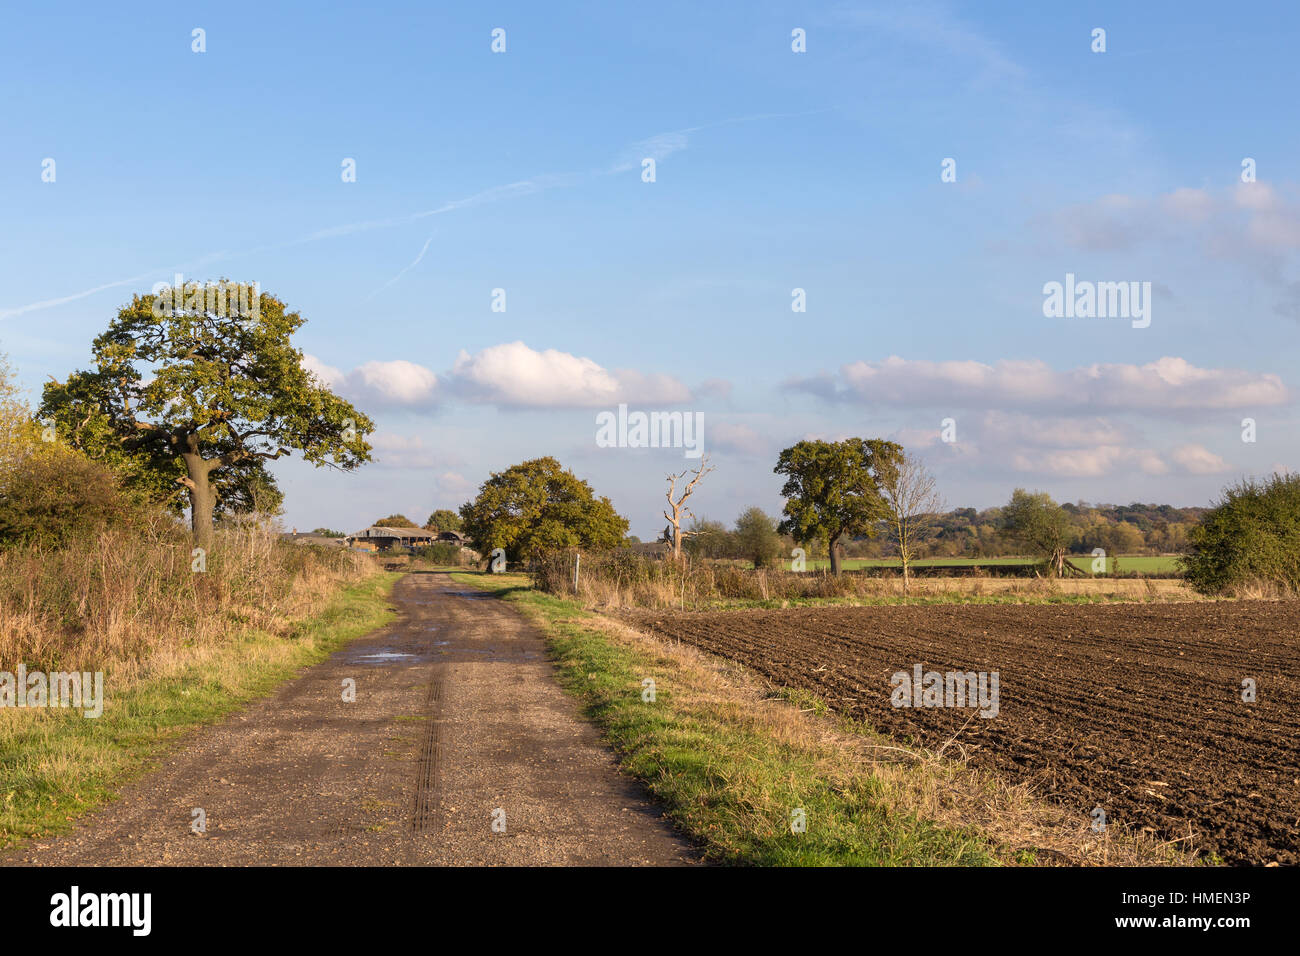 Farm track along side a ploughed field with trees and blue sky with clouds.  Taken on a bright autumn afternoon. Stock Photo